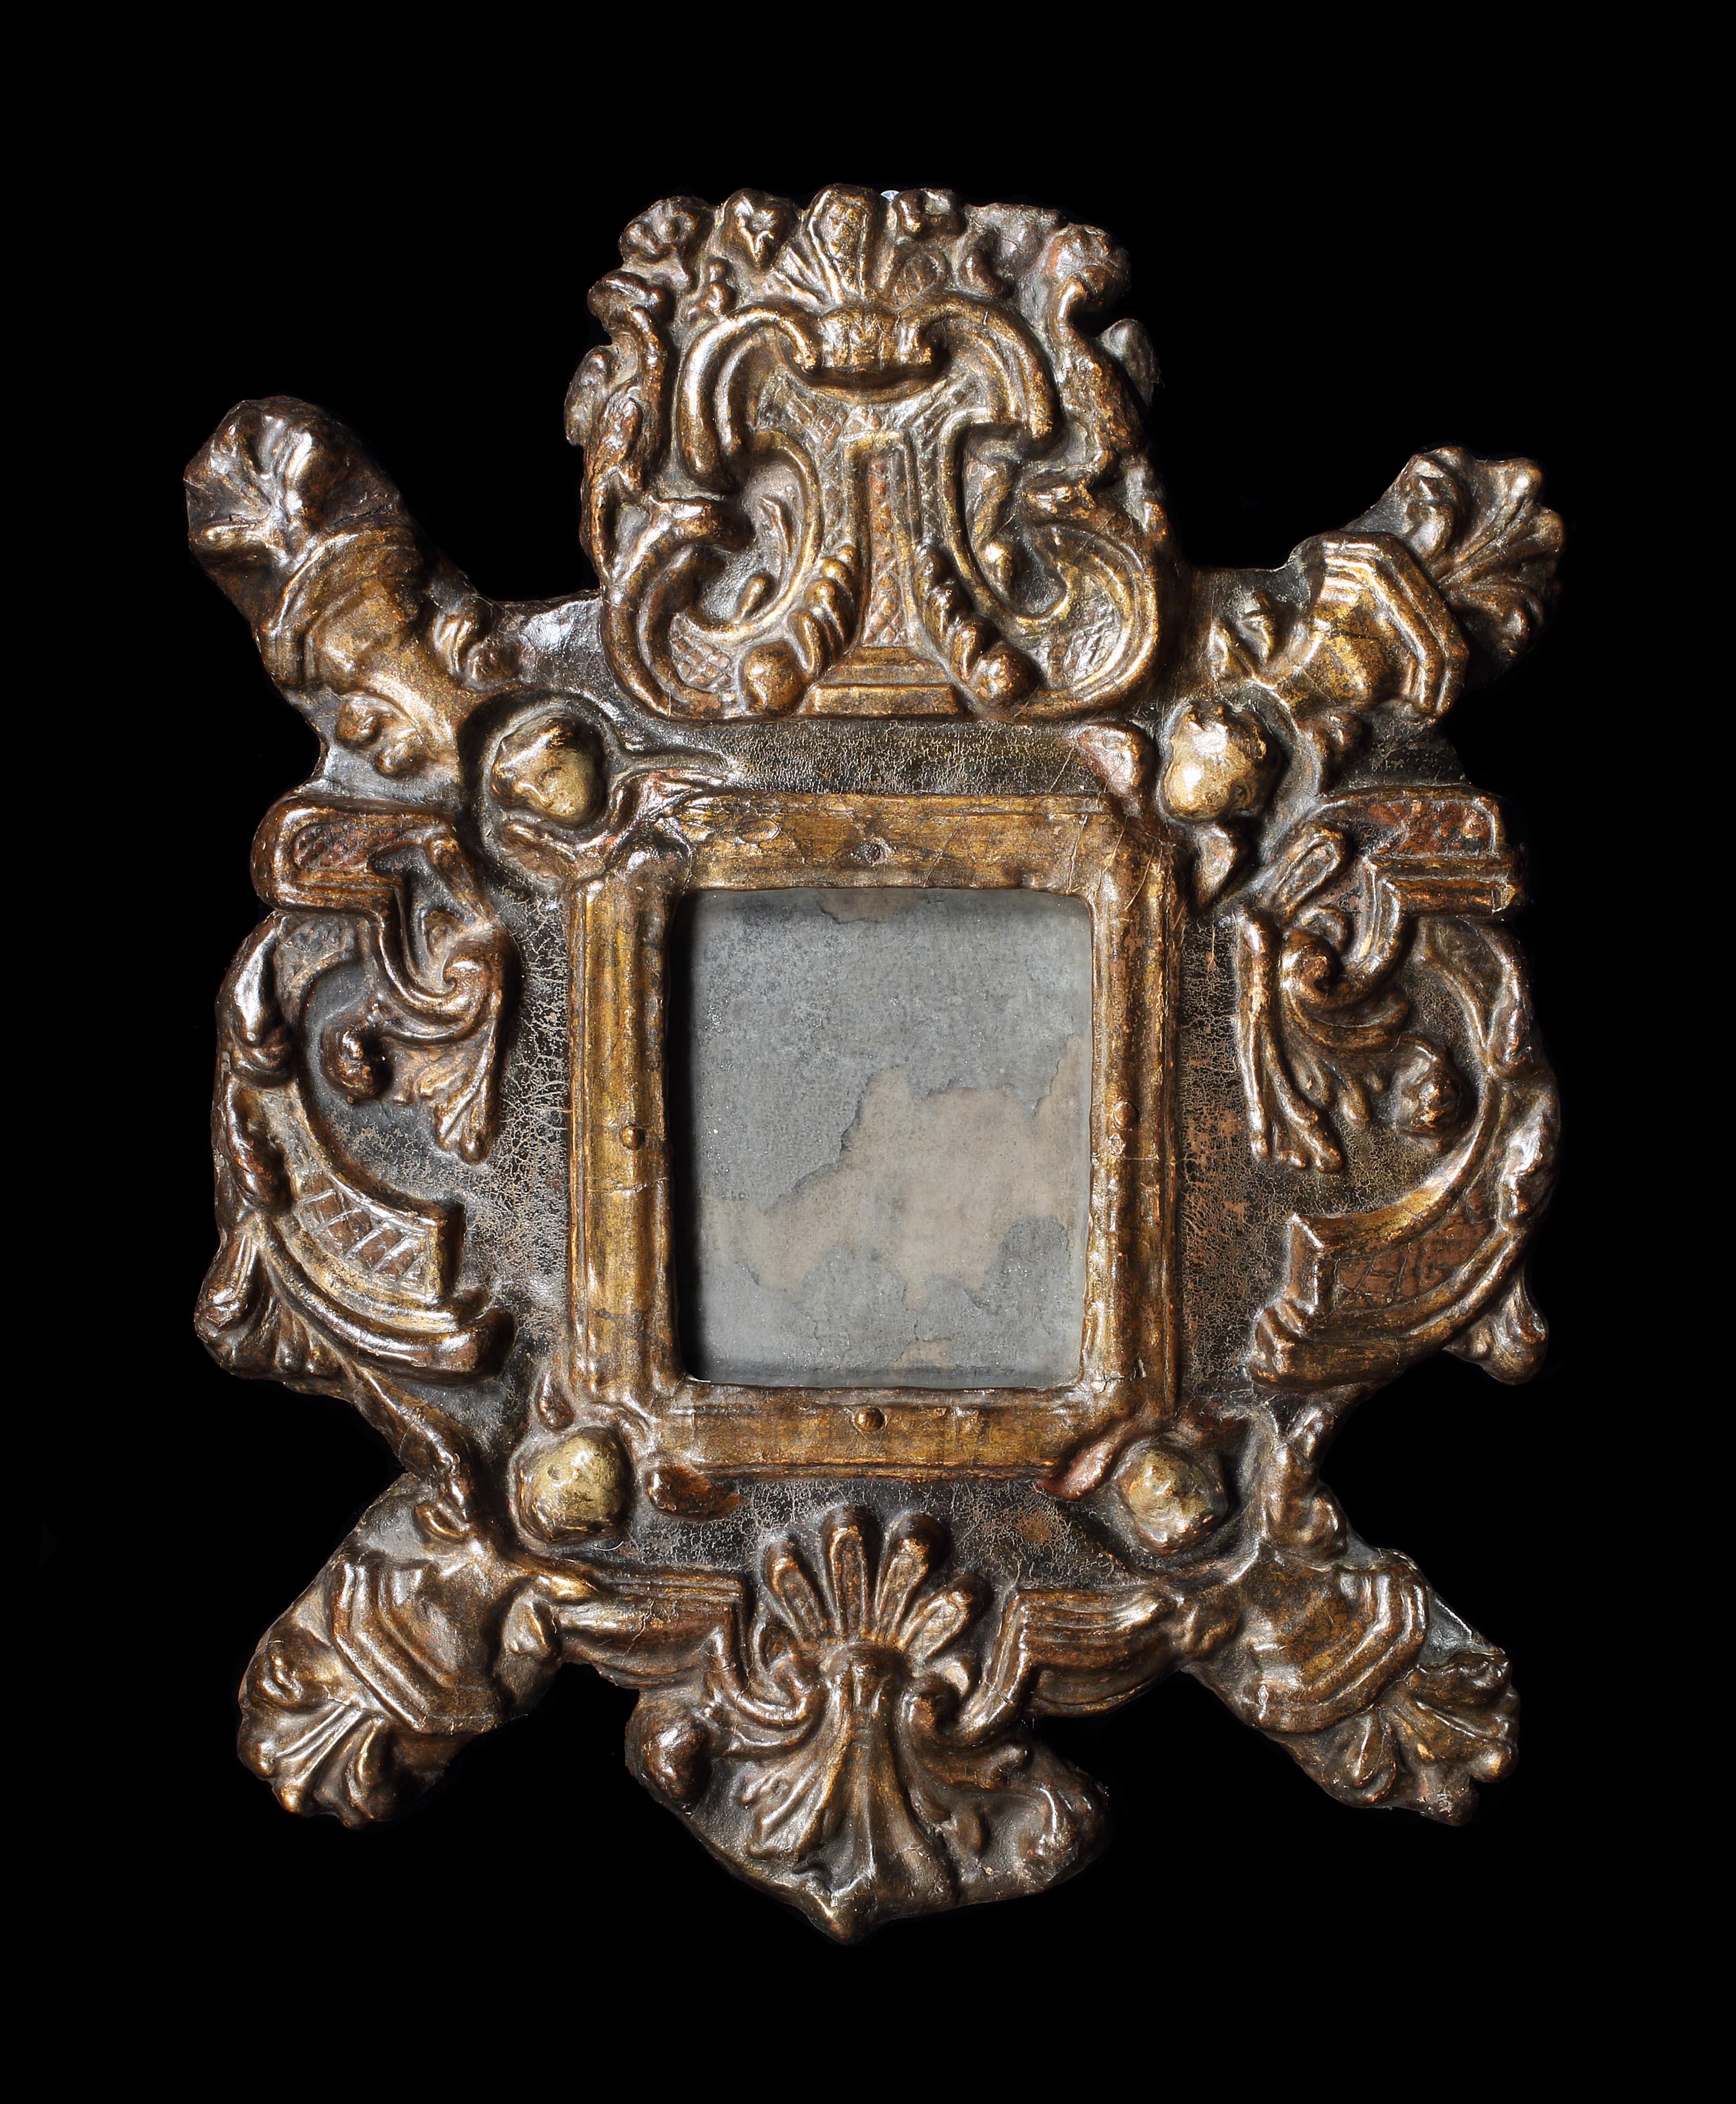 This charming small mirror has survived in extraordinary condition with its original gilding and mirror plate which is very unusual particularly for a piece made from a delicate medium such as papier mâché. The papier mâché creates a softness which